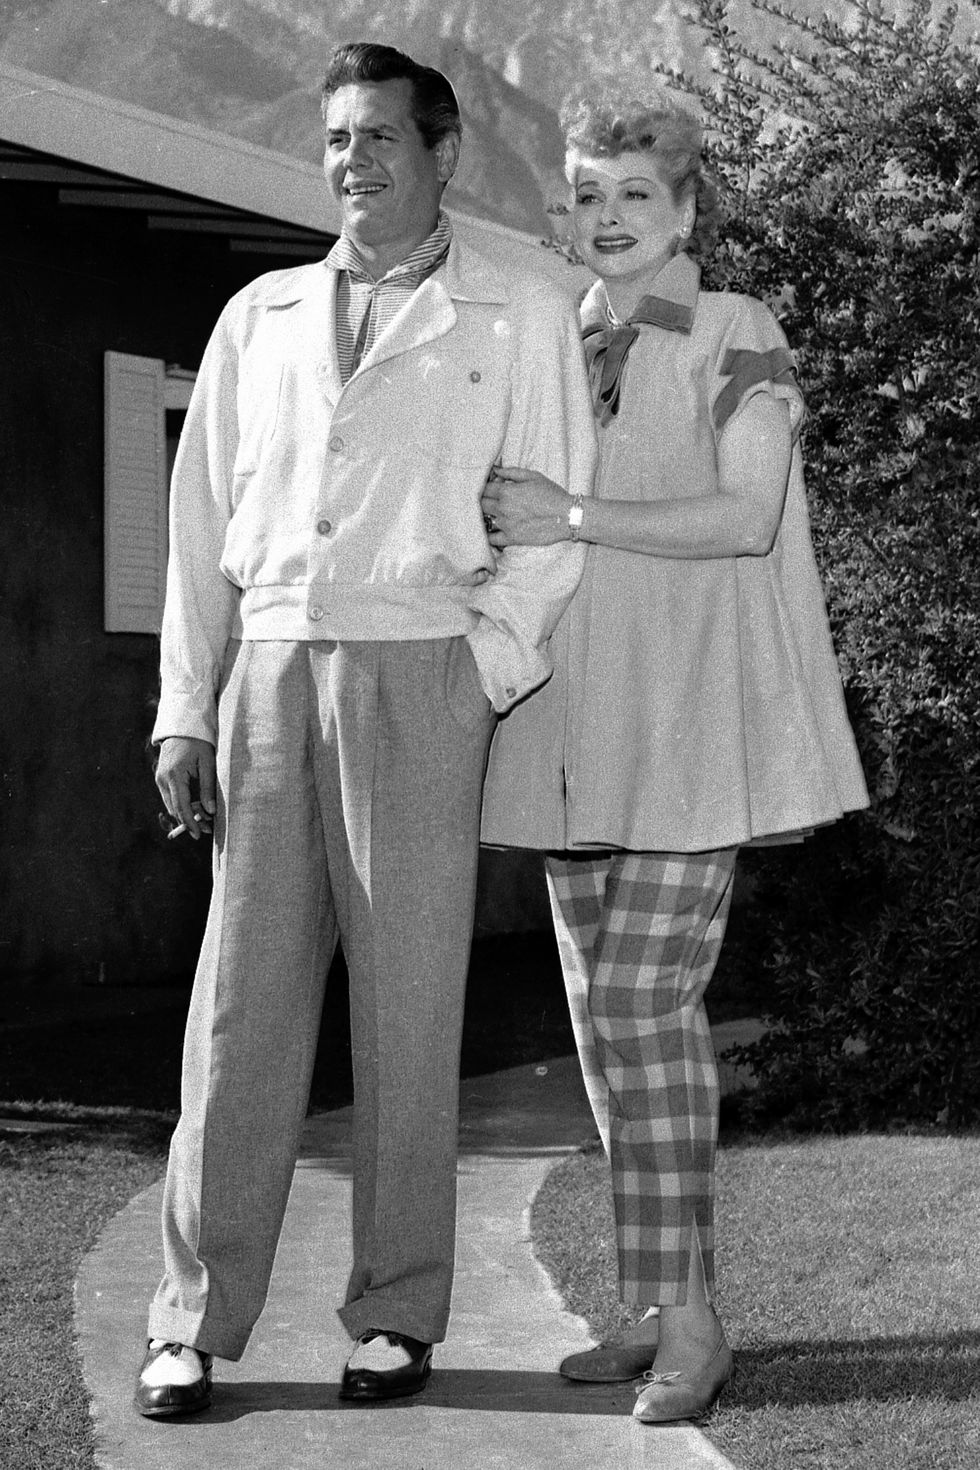 Cuban-born actor, comedian, and musician Desi Arnaz (1917 - 1986) stands with his pregnant wife, American actress and comedian Lucille Ball (1911 - 1989) as she lovingly holds on to his arm outside their home, 1953.  Coincidentally, the couples' son Desi Jr. would be born on the same day (January 19th) that the character of 'Little Ricky' on the television show 'I Love Lucy' was born. (Photo by CBS Photo Archive/Getty Images)